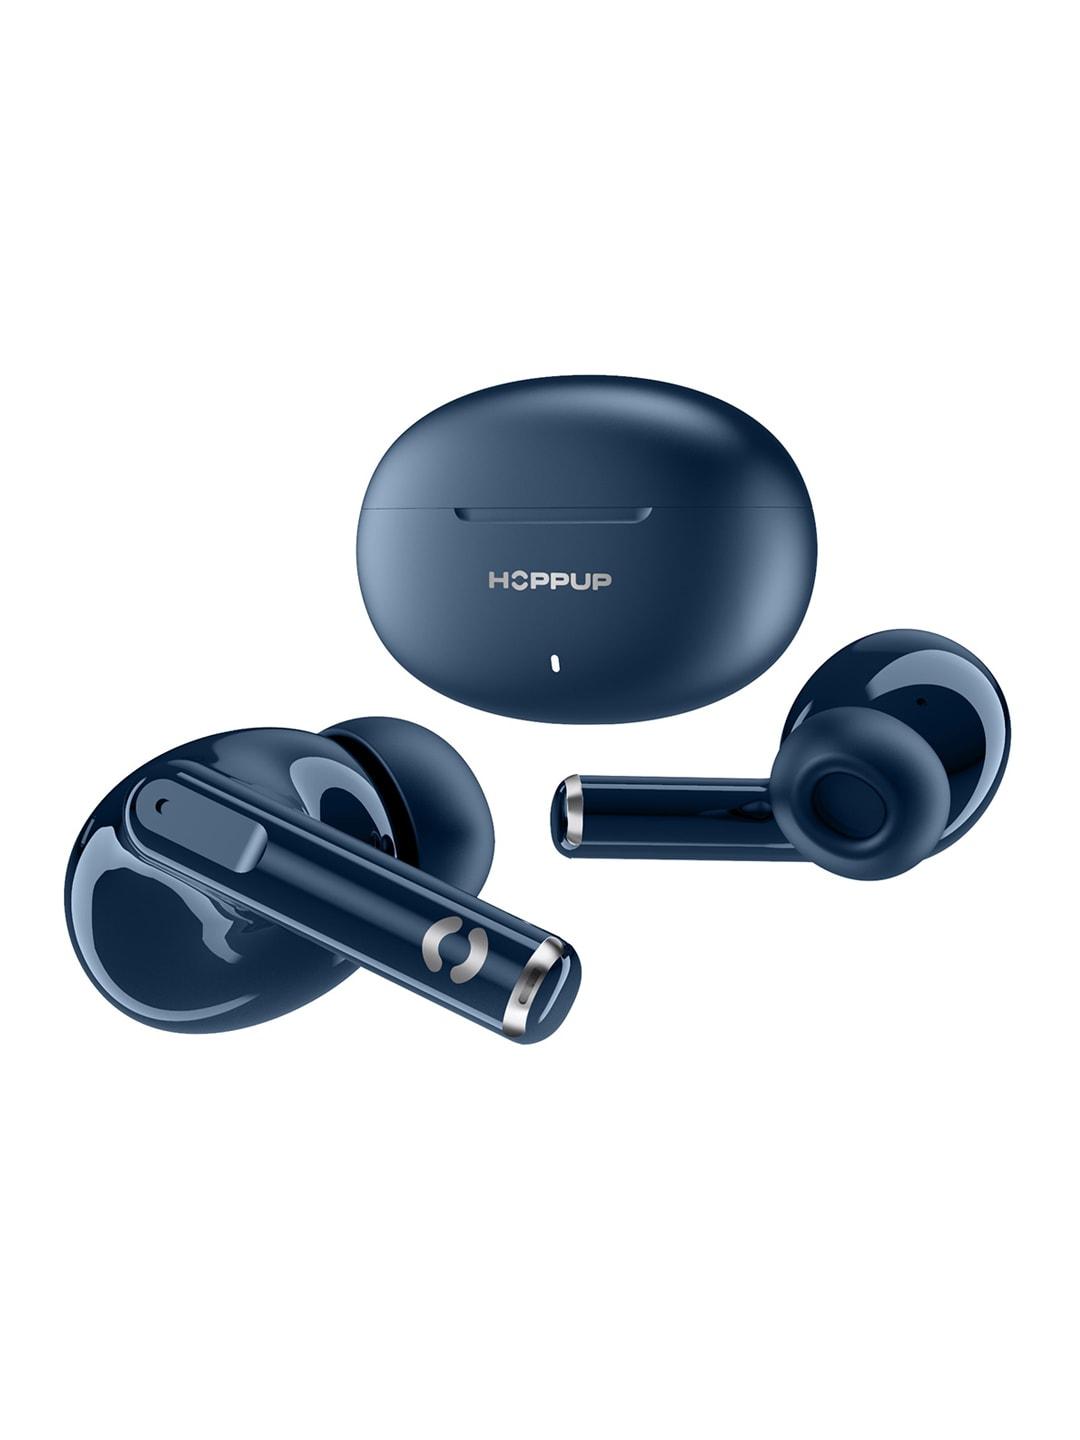 HOPPUP AirDoze S40 Earbuds With 13MM Drivers